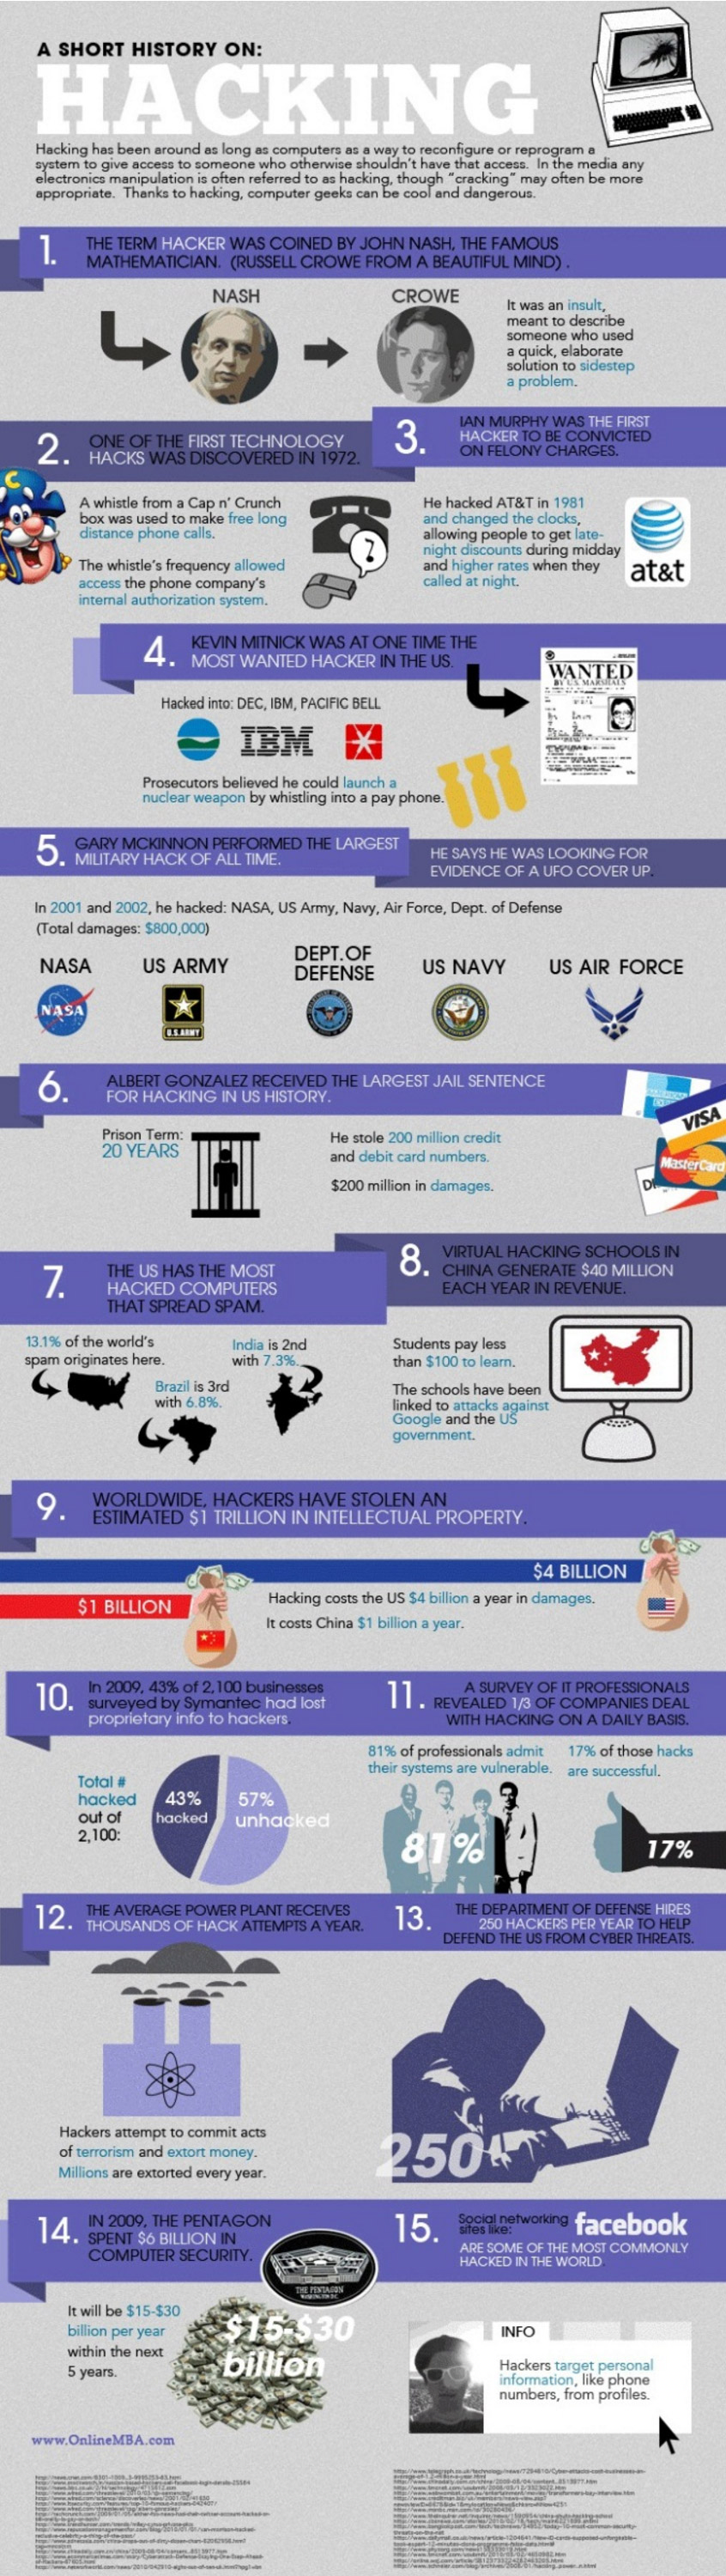 A short history of hacking infographic statistics